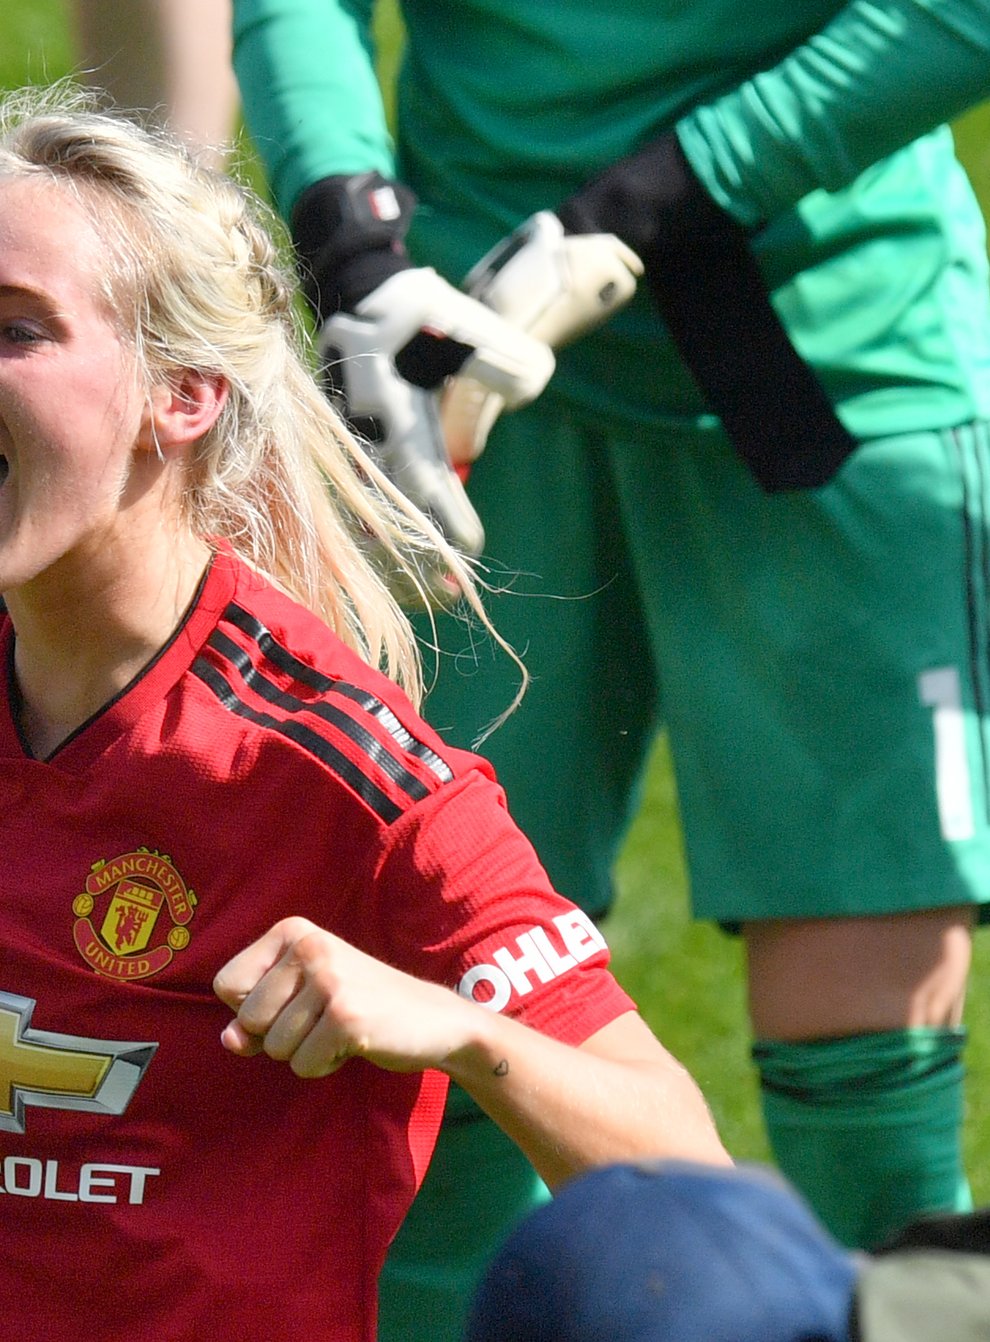 Turner earned her first England call-up on the same day as she signed her new deal with Manchester United